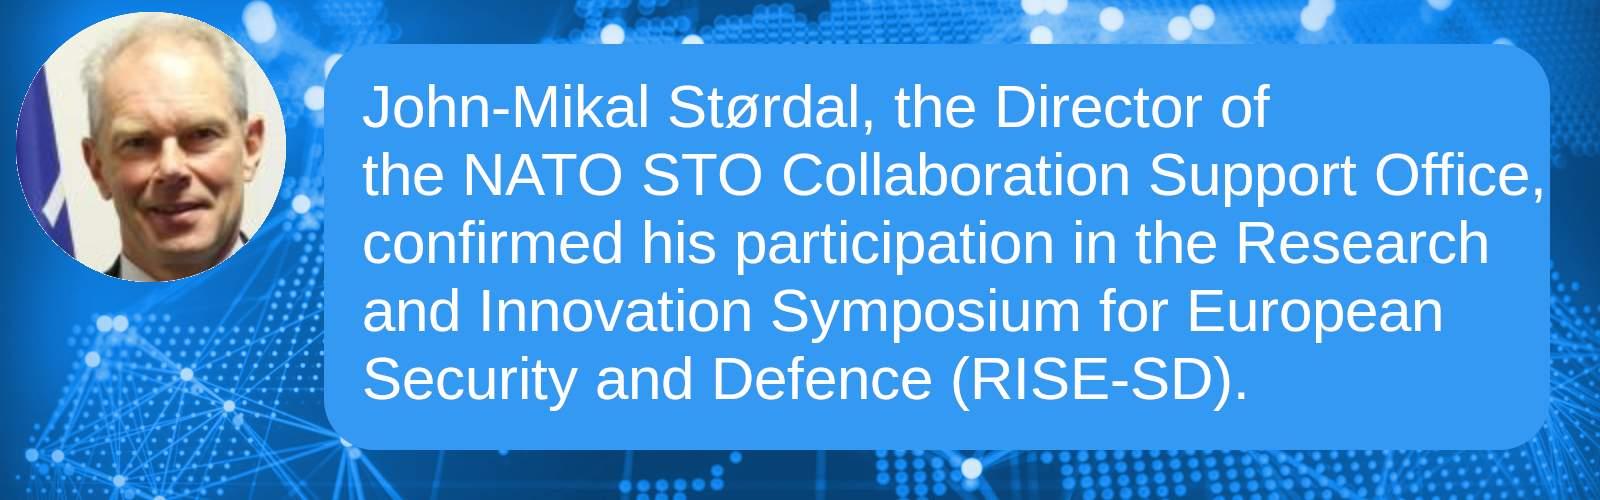 John-Mikal Størdal, the Director of the NATO STO Collaboration Support Office, confirmed his participation in the Research and Innovation Symposium for European Security and Defence (RISE-SD)